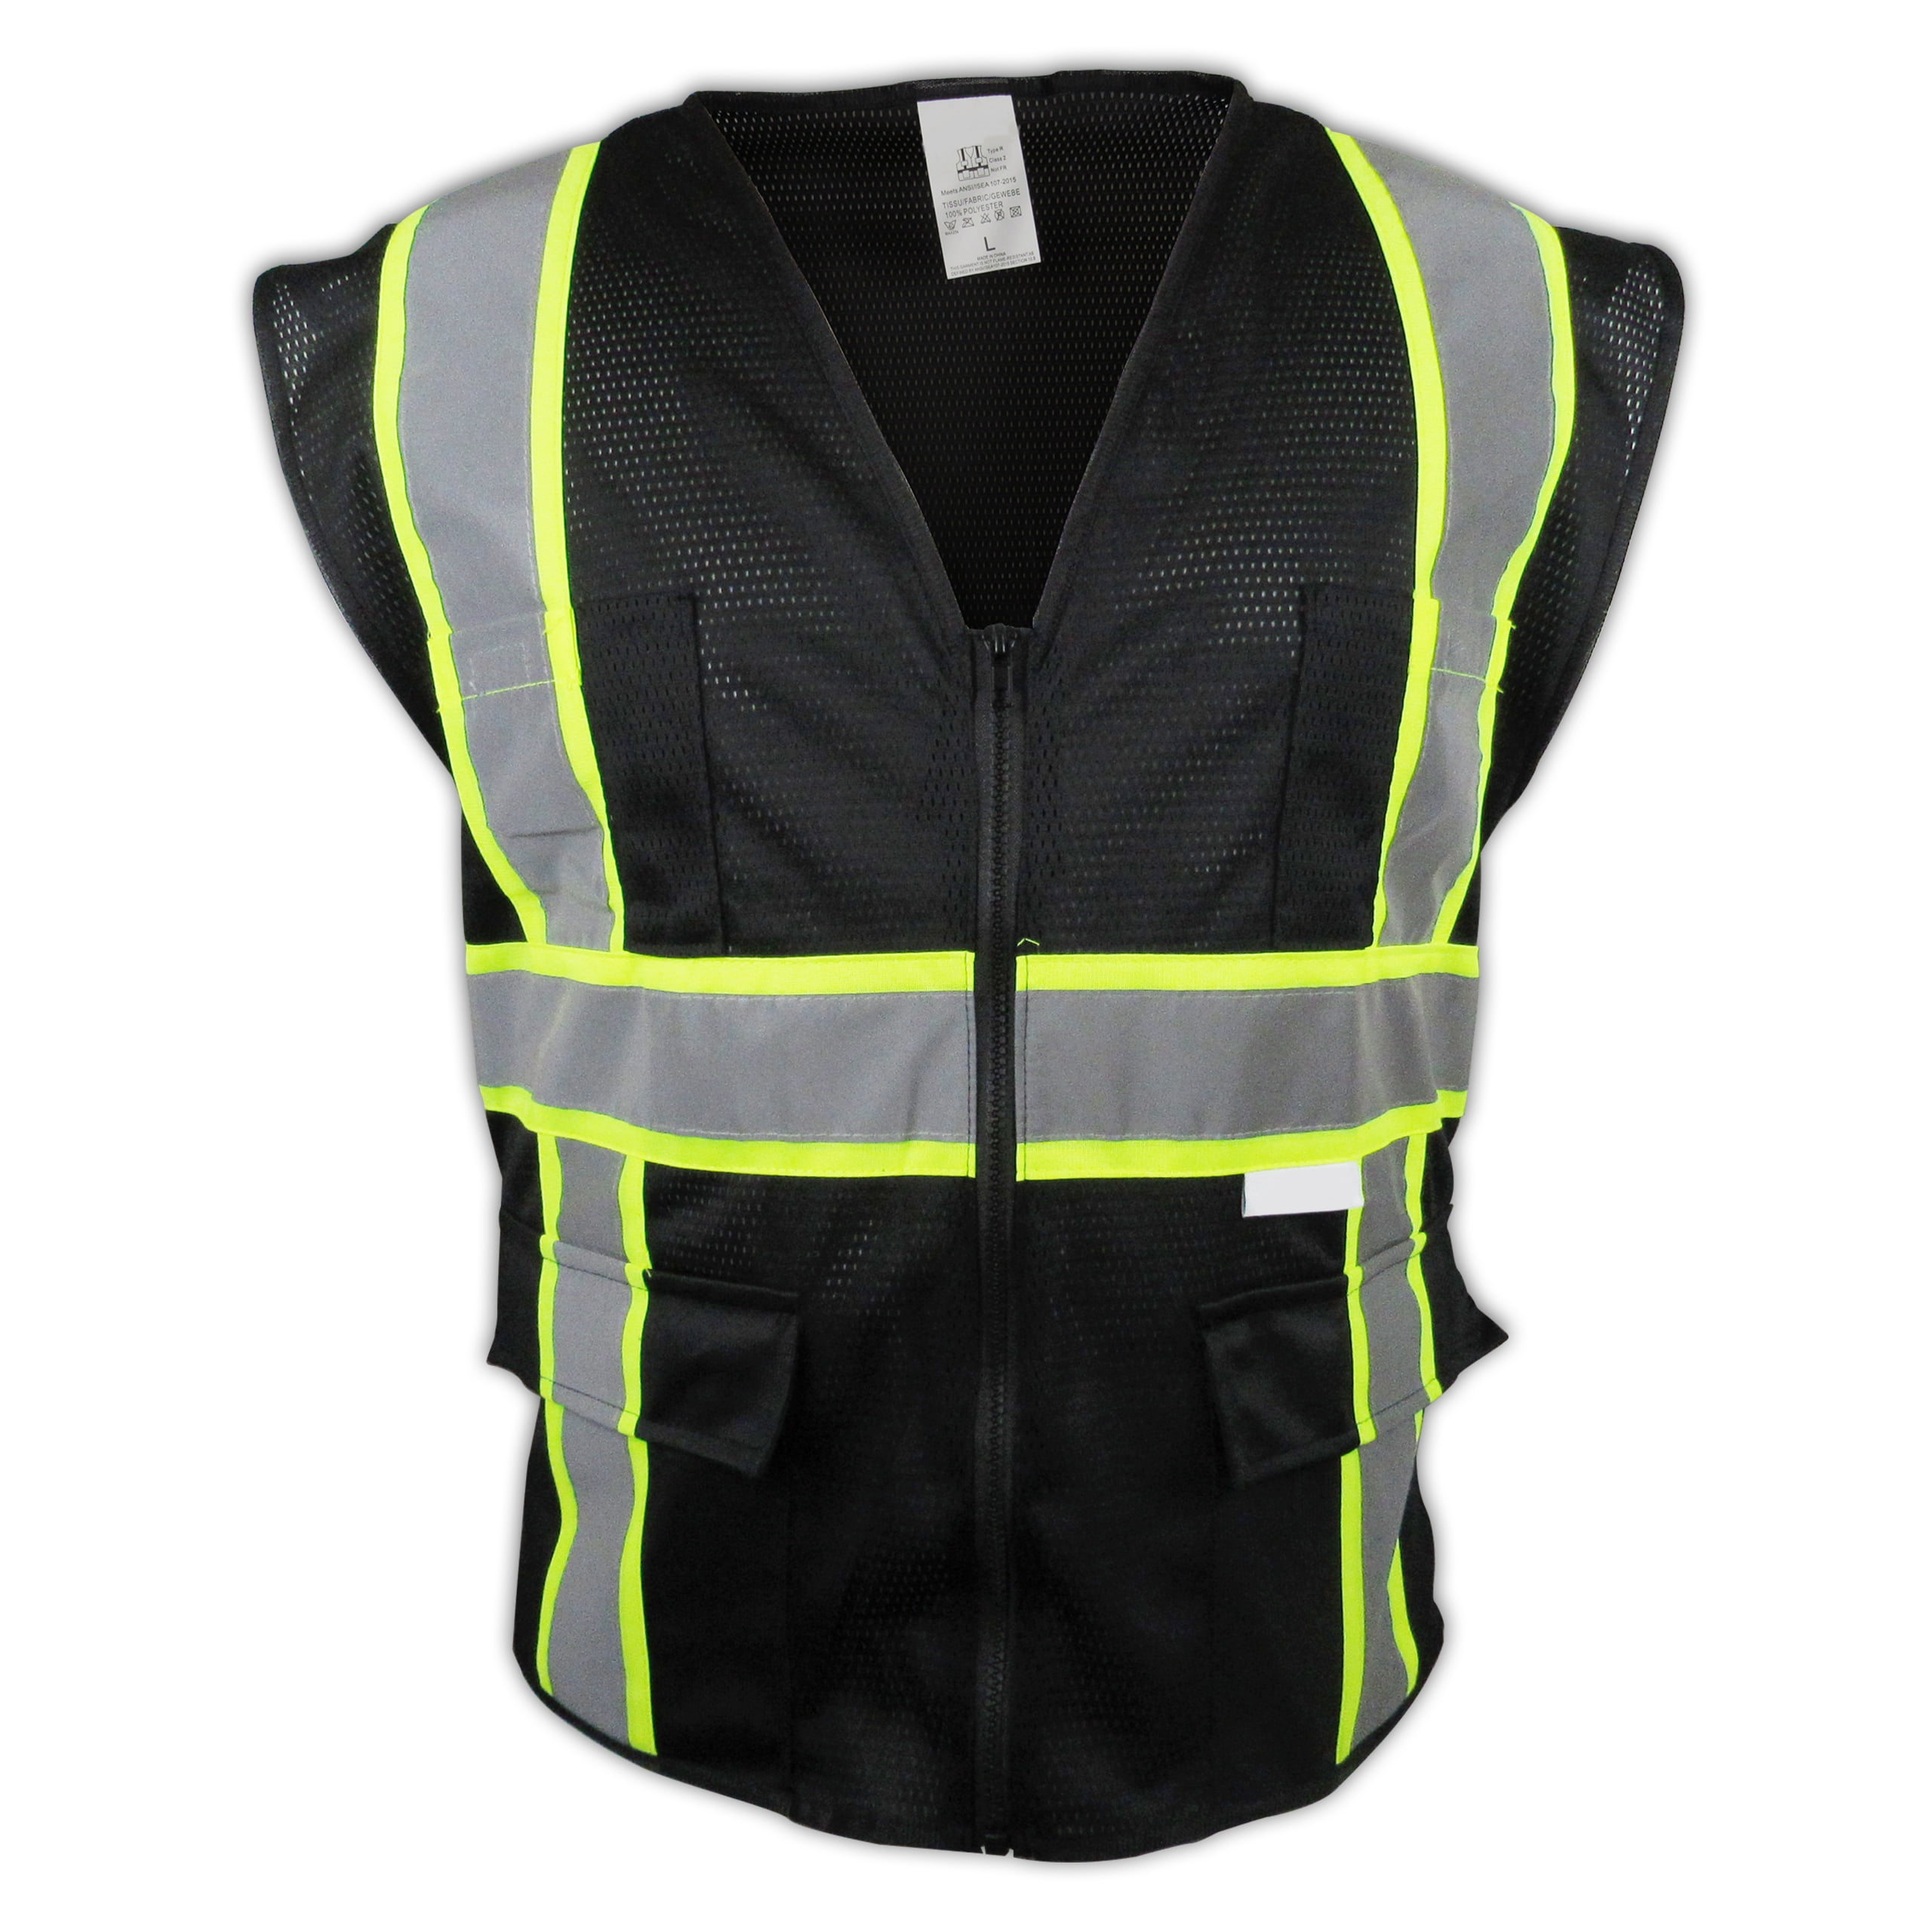 Safety Reflective Vest Visibility Night Running Walking Security Clothing Hot 